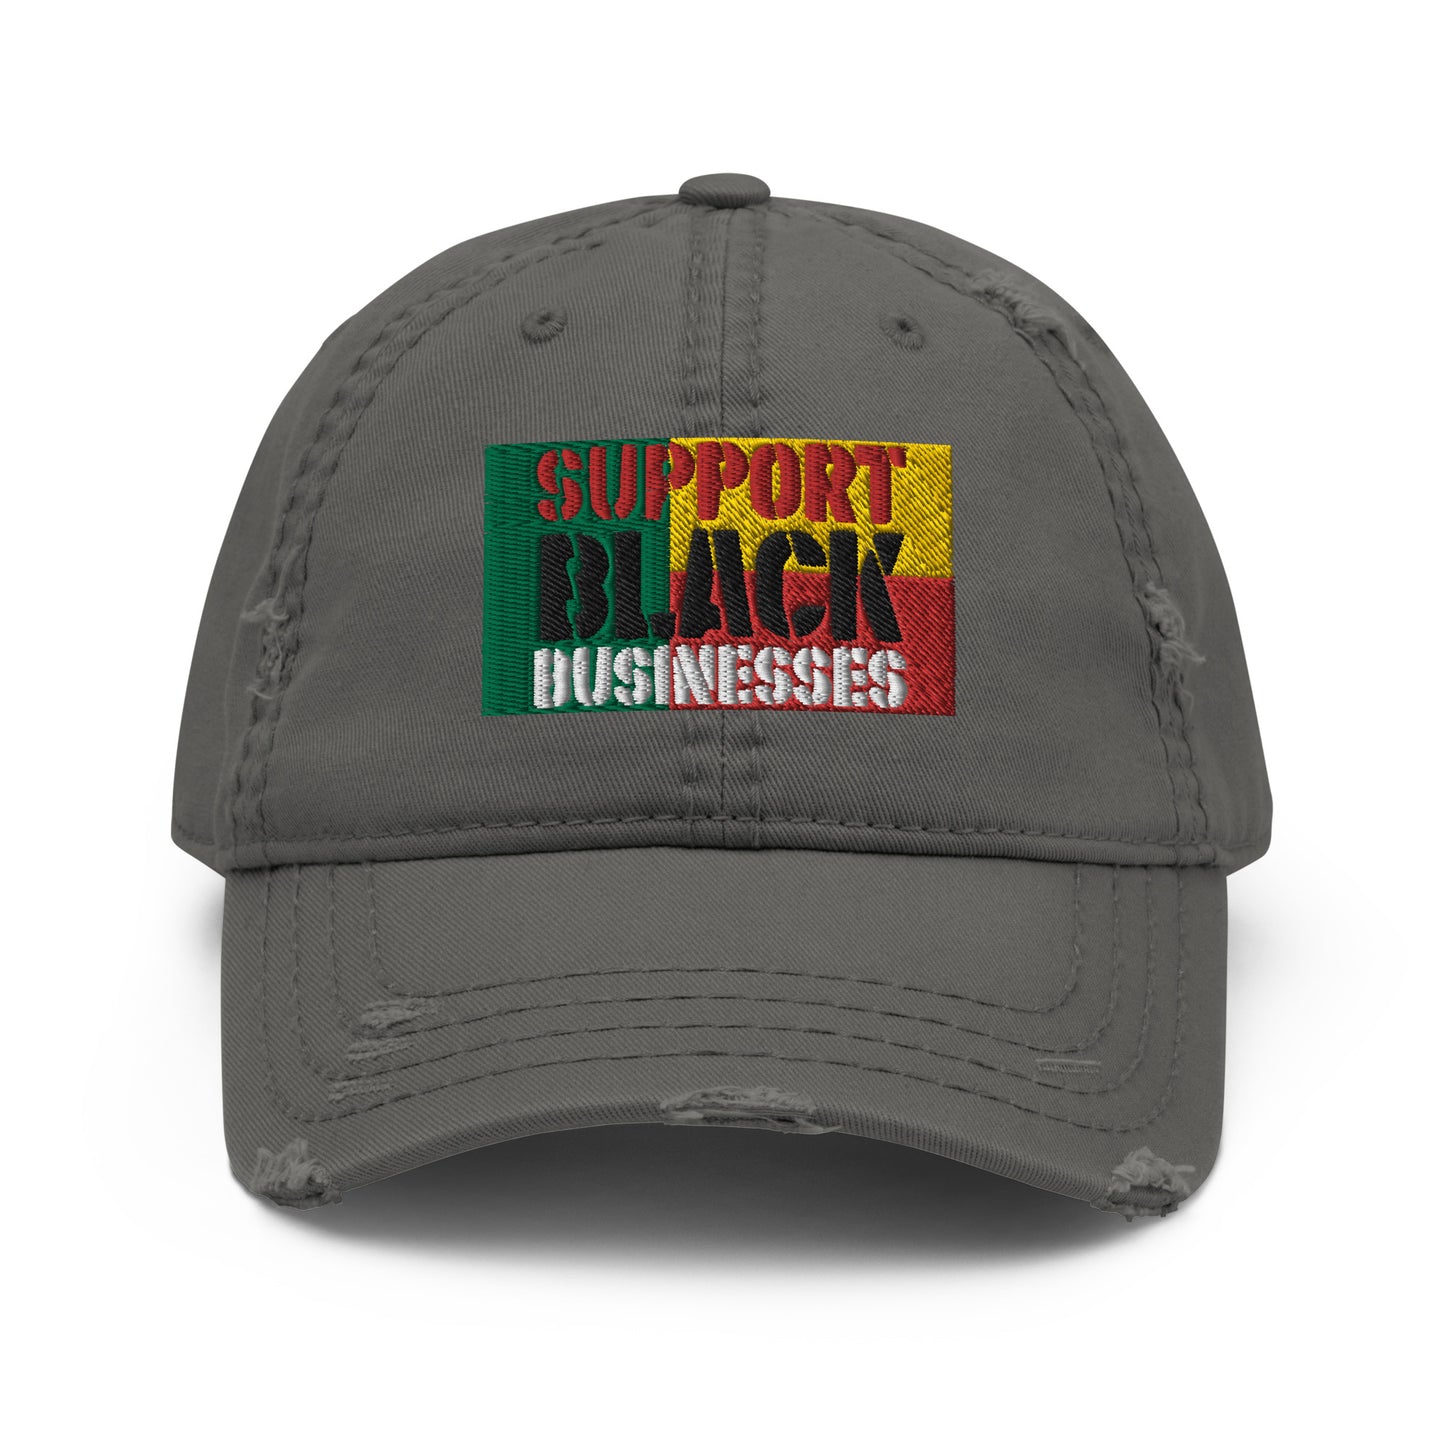 Support BLK businesses Distressed Dad Hat by Teammate Apparel